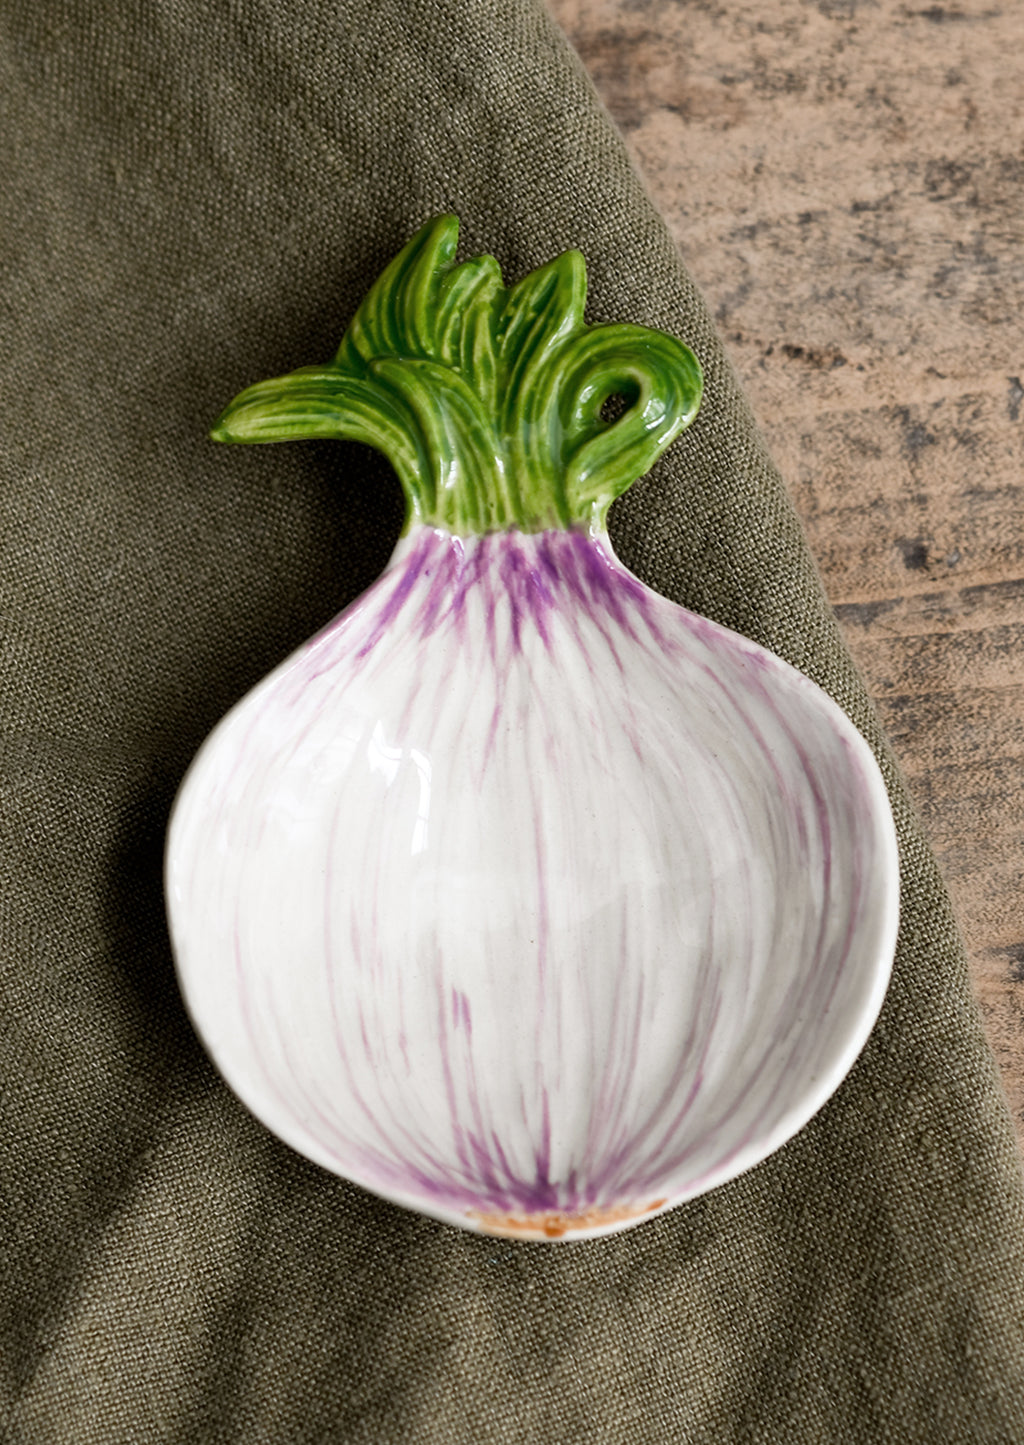 Spring Onion: A ceramic veggie dish in the shape of a spring onion..